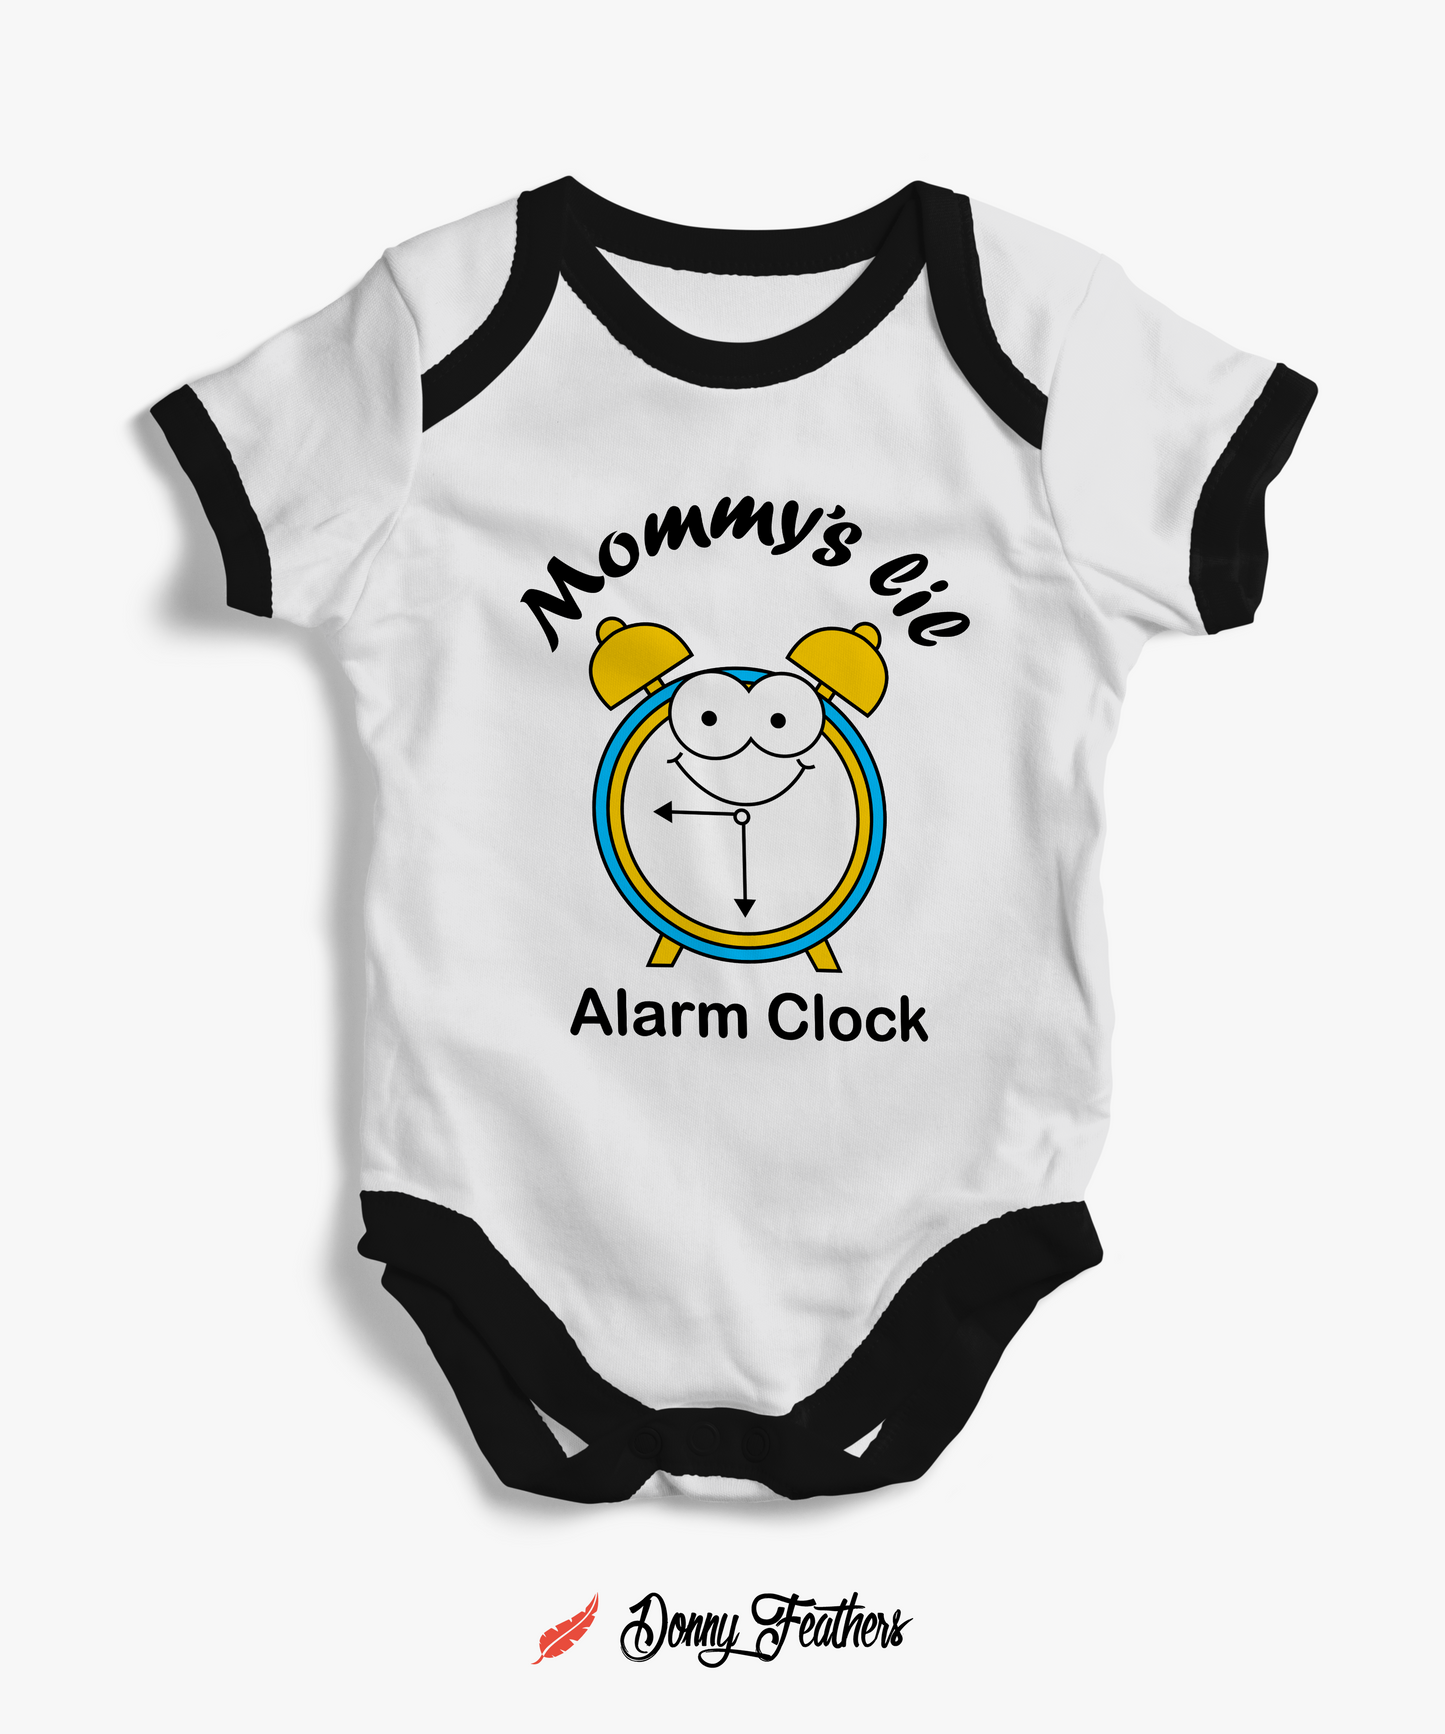 Baby Rompers For Girls | Mommy's Alarm Clock Romper (White & Black) By: Donny Feathers